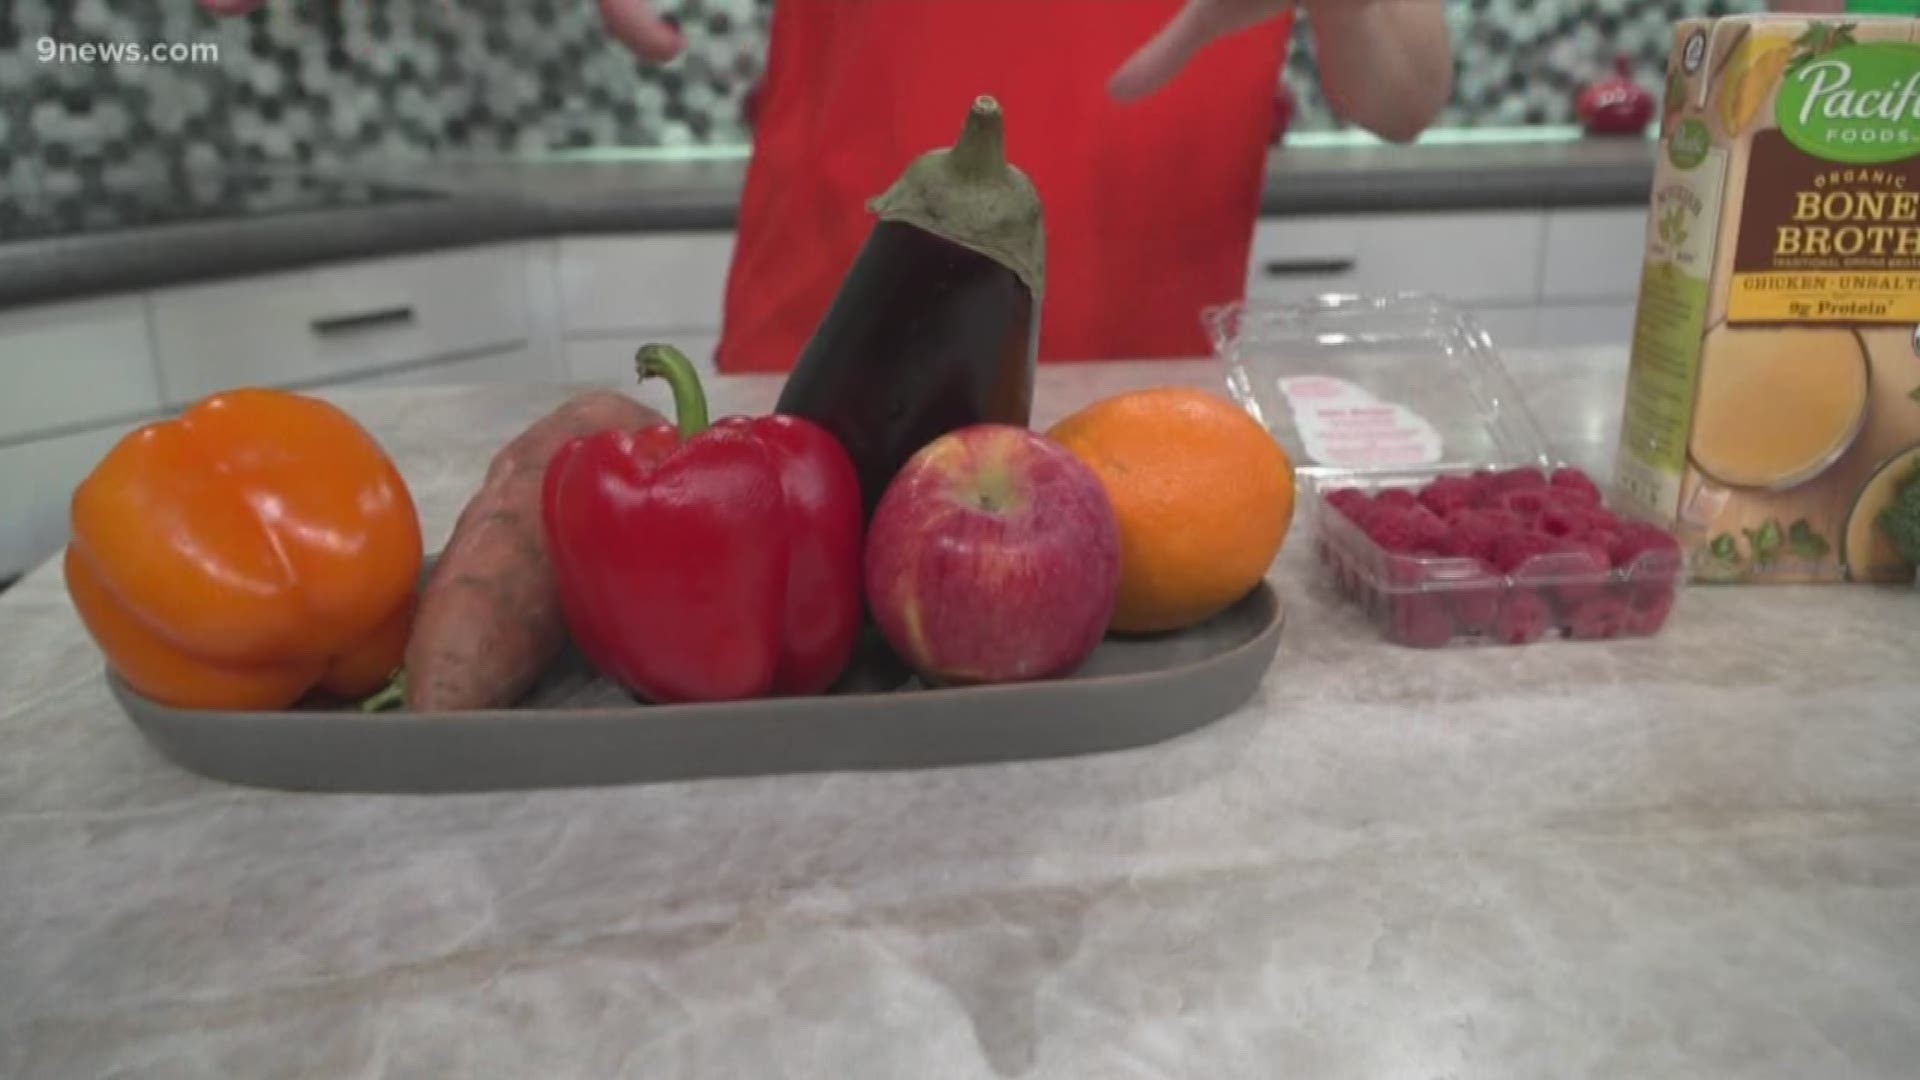 A flat stomach isn't genetic! Everyone can have one with the right food in the fridge. Nutritionist Kristin Kirkpatrick is here to show us what those foods are.